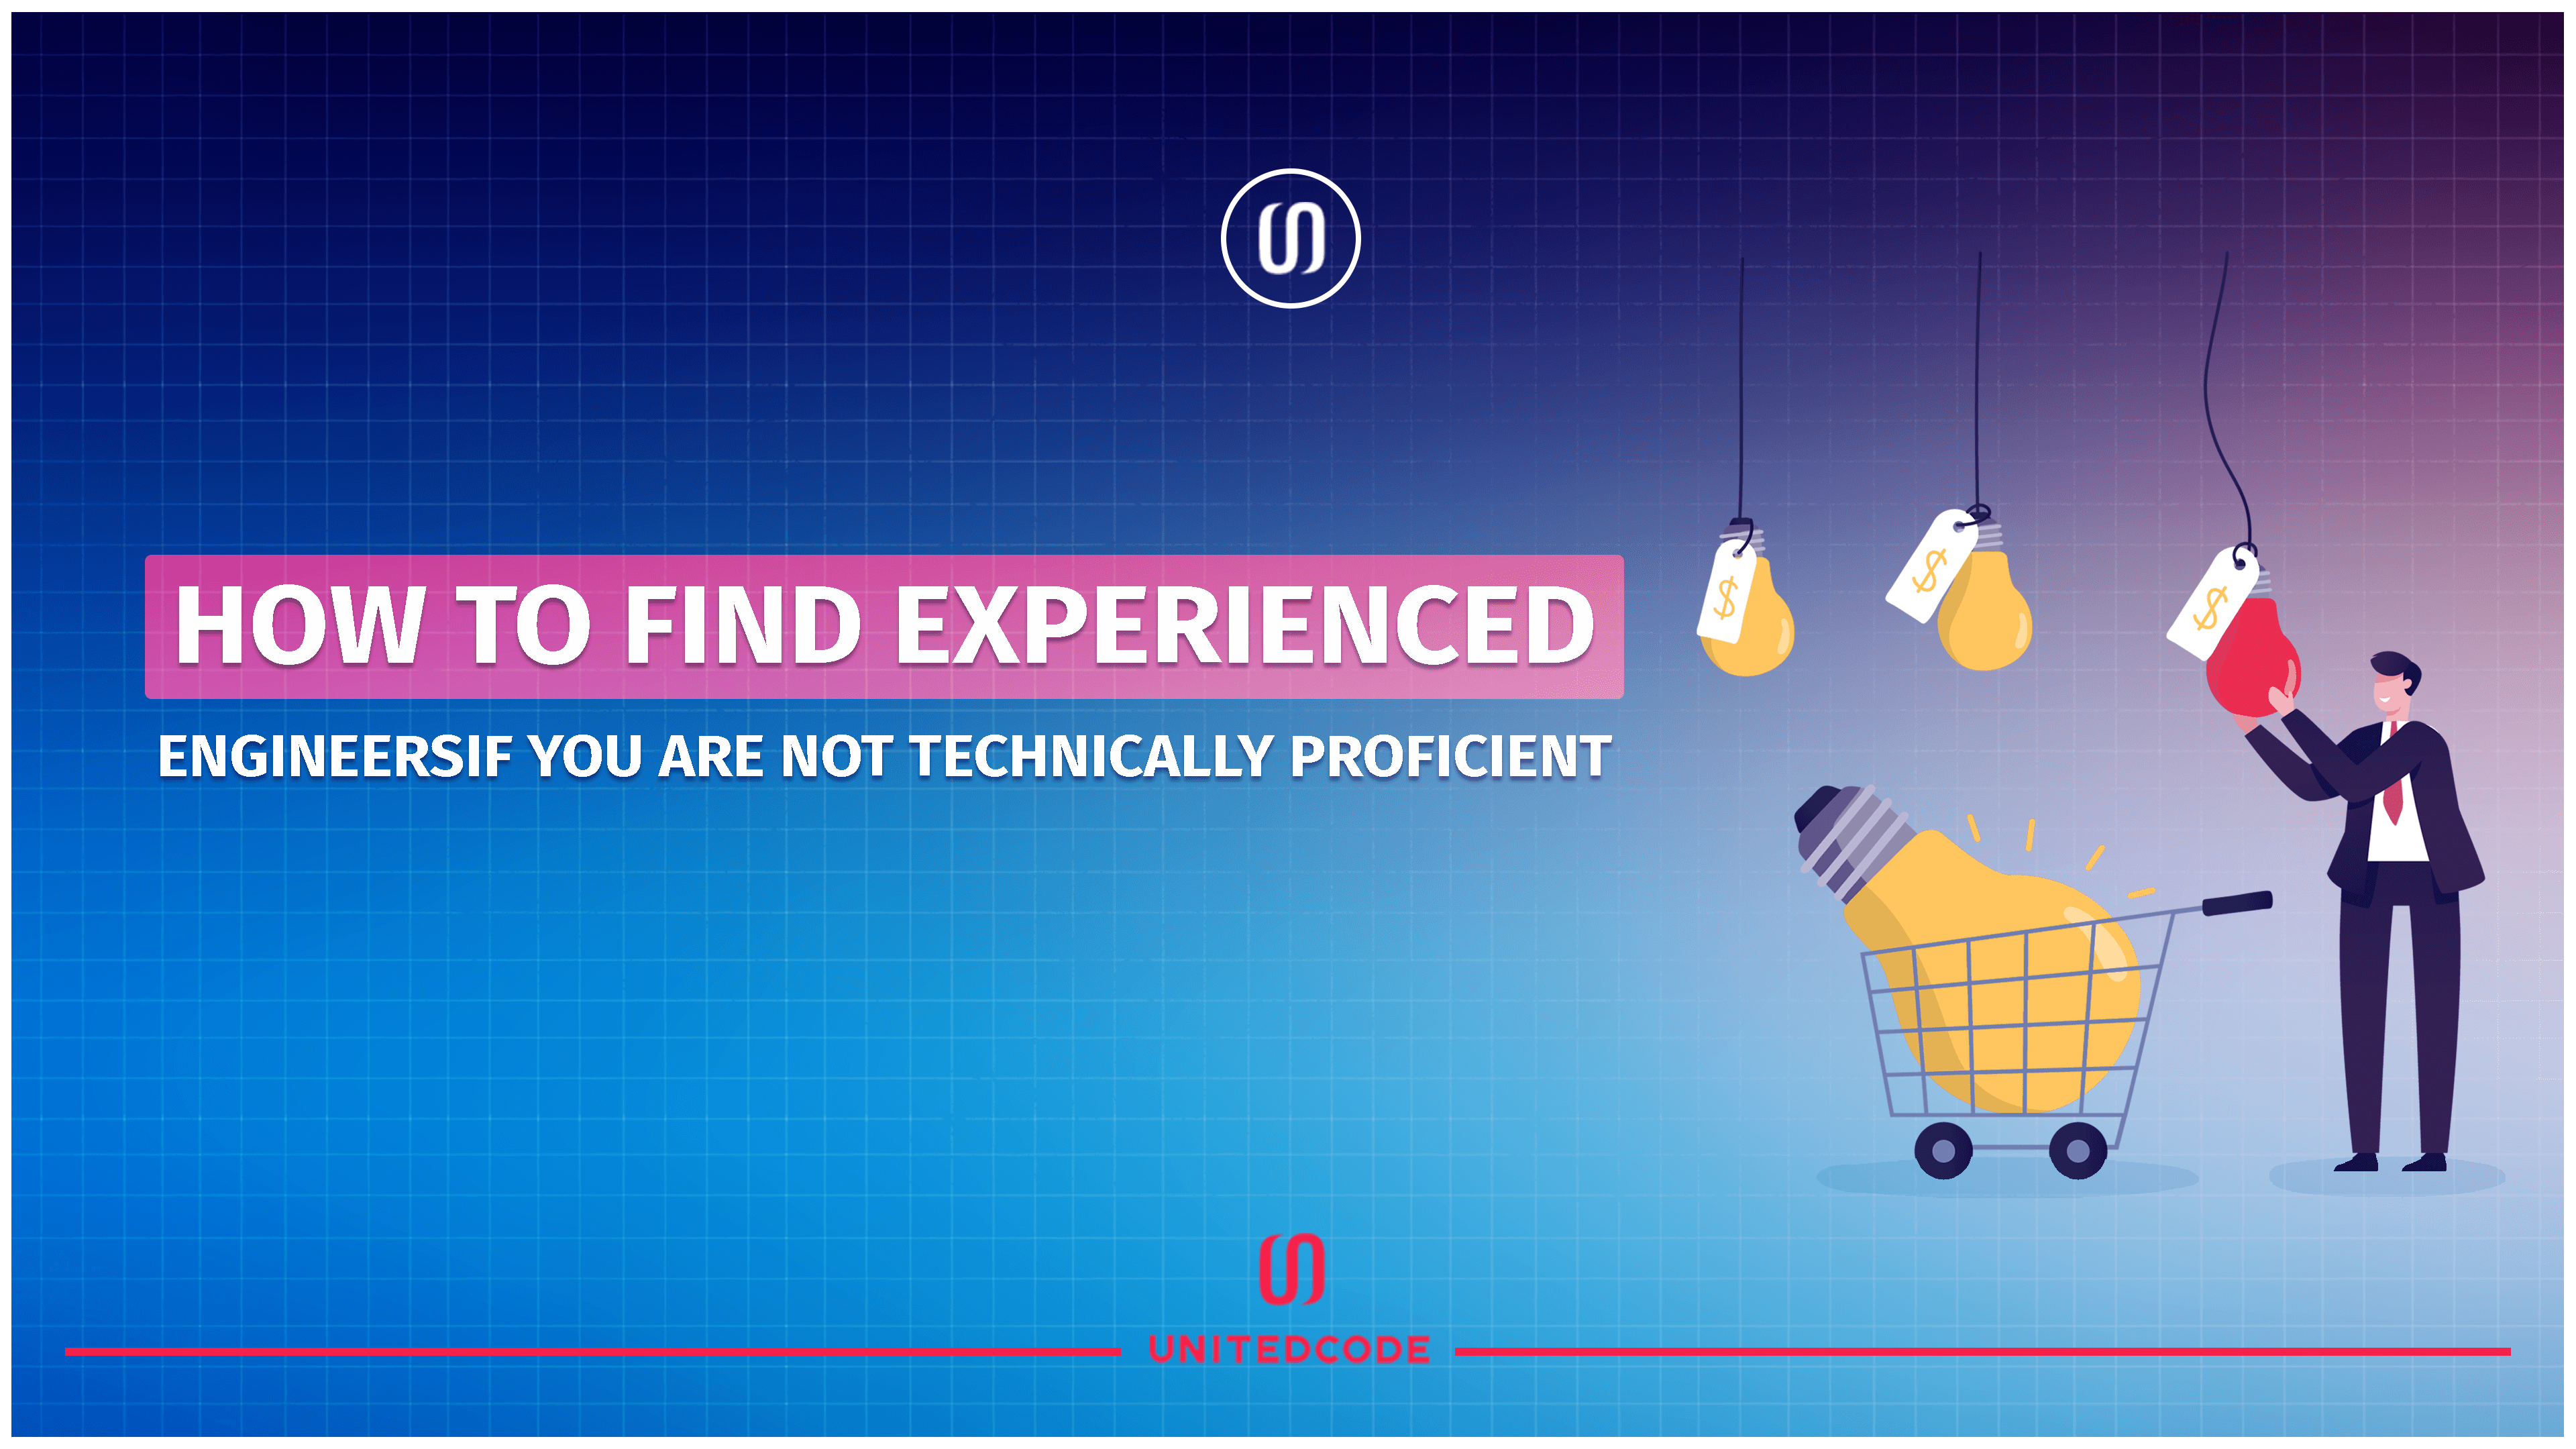 how to find experienced engineers if you are not technically proficient